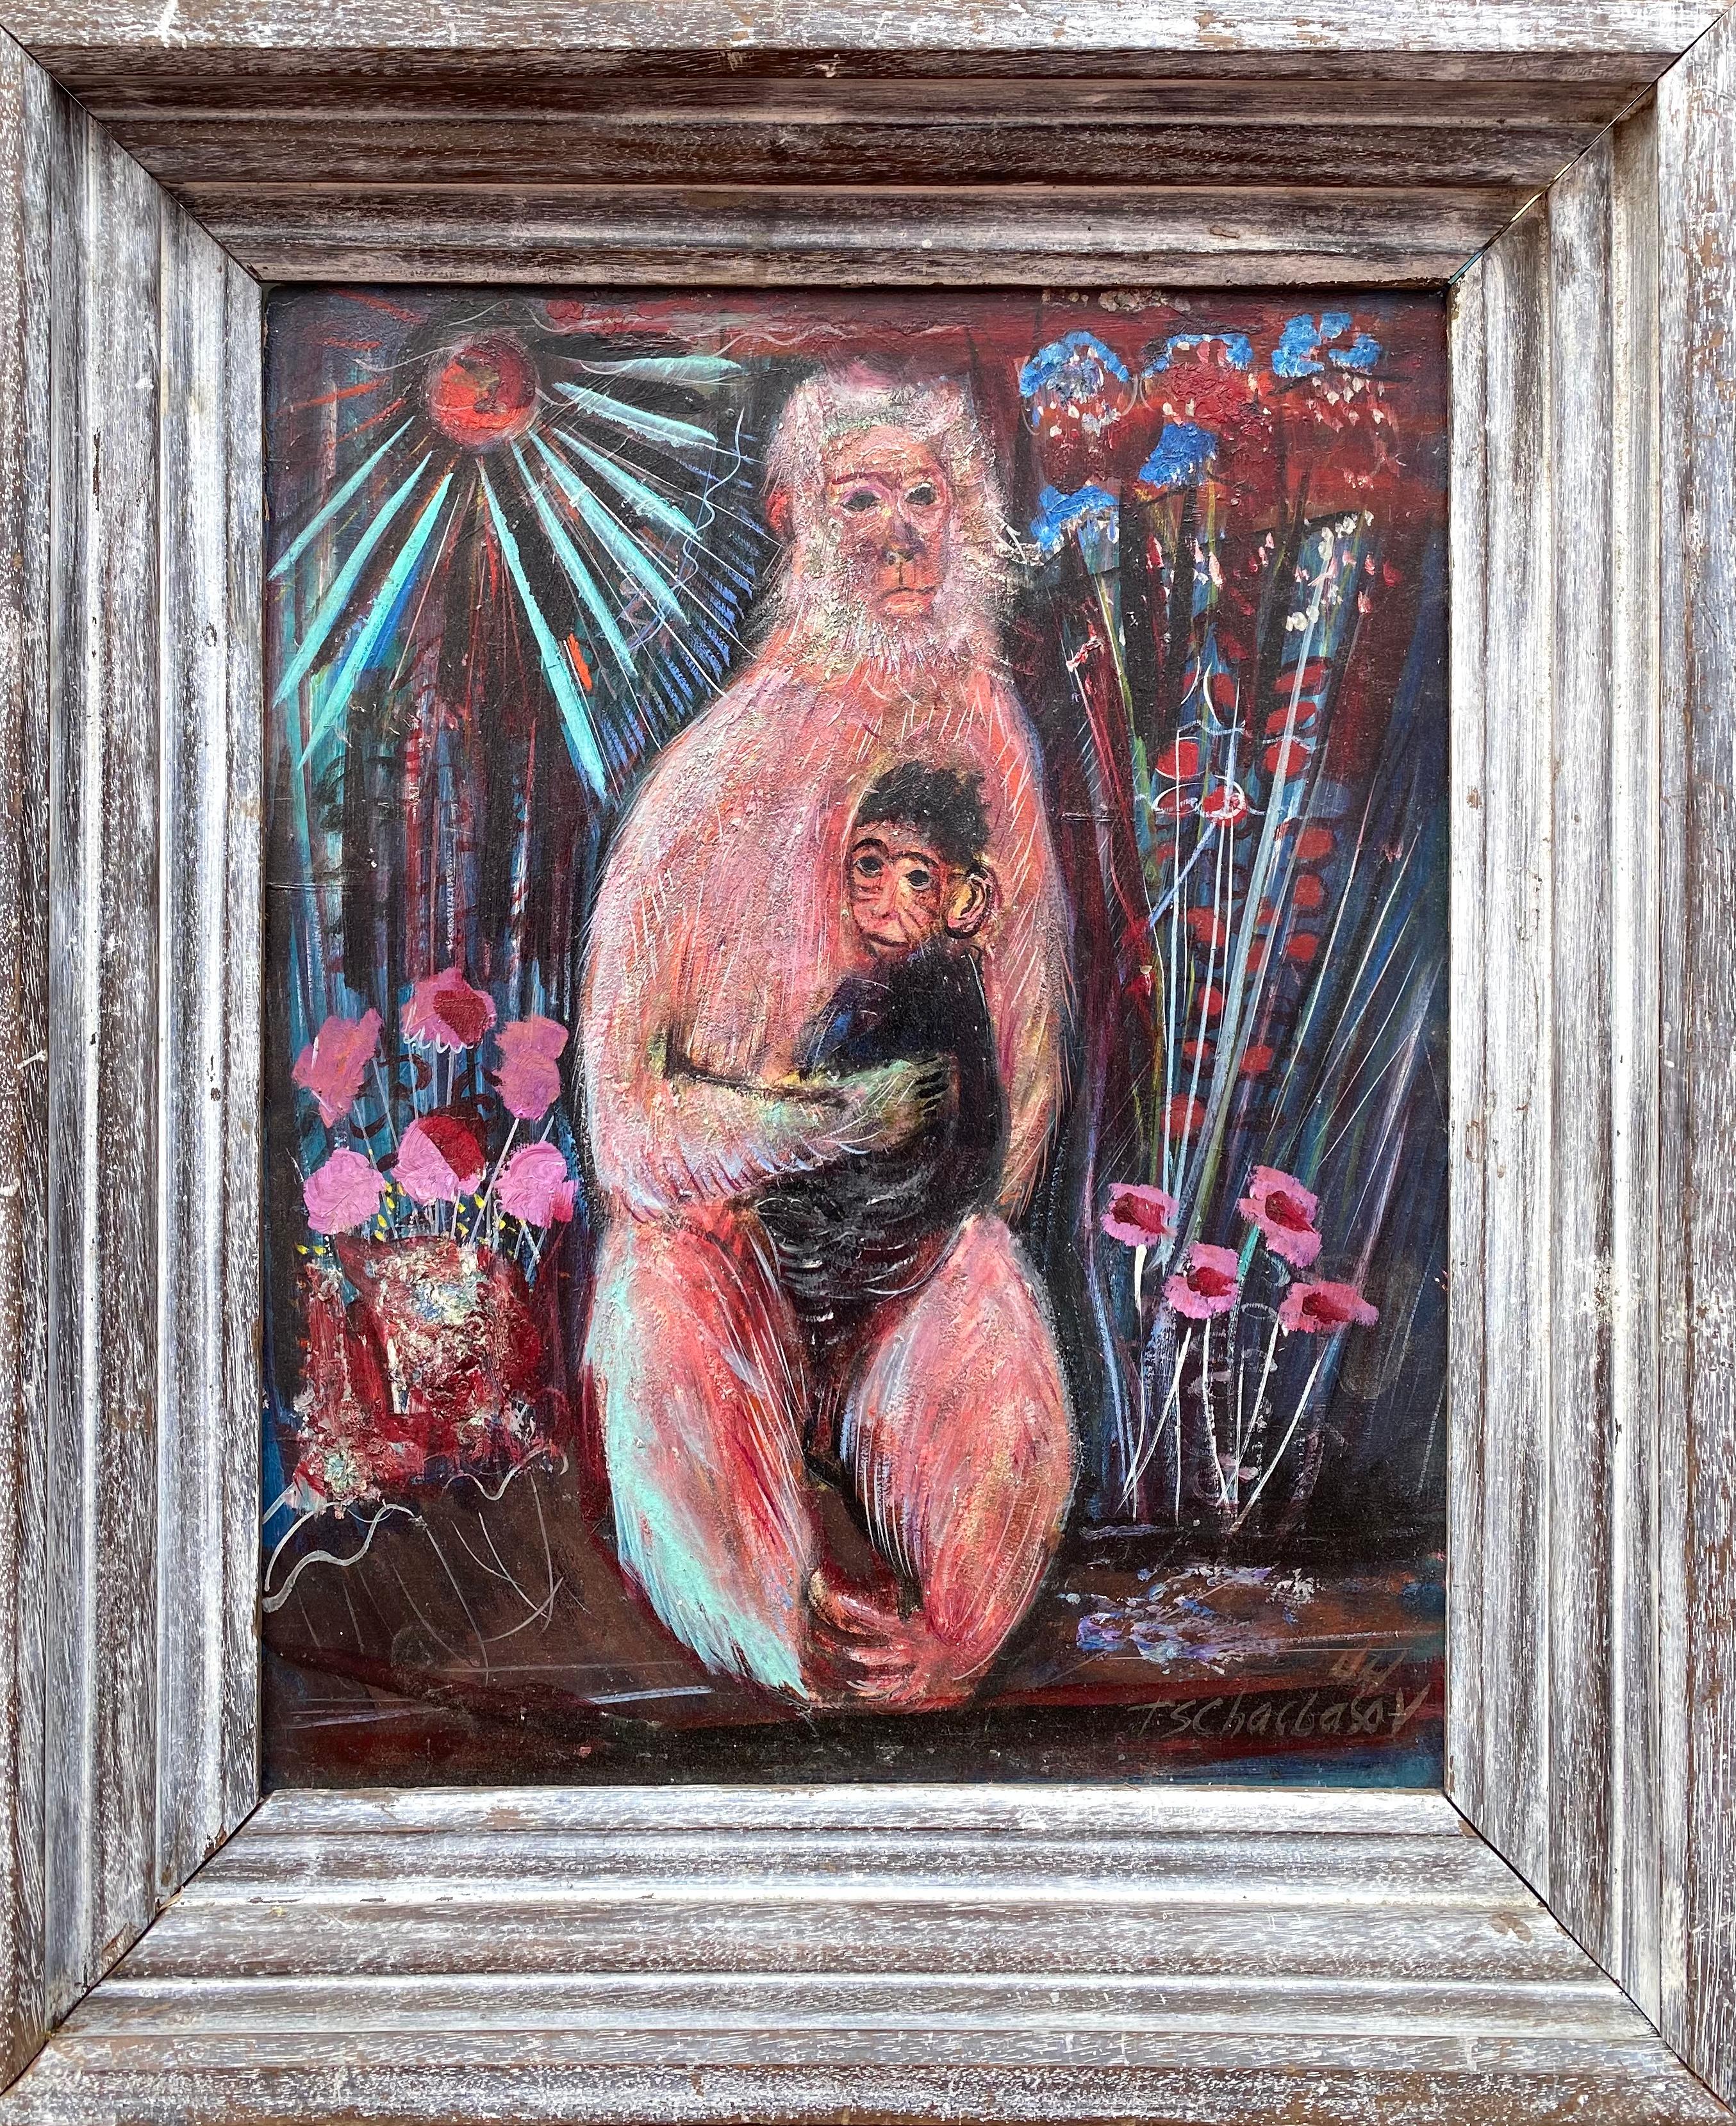 Here for your consideration is a modern painting oil on heavy fiberboard of a mother ape with her baby done by the well known Russian/American artist, Nahum Tschacbasov.  Signed lower right and dated 1944. The painting is housed in a white washed